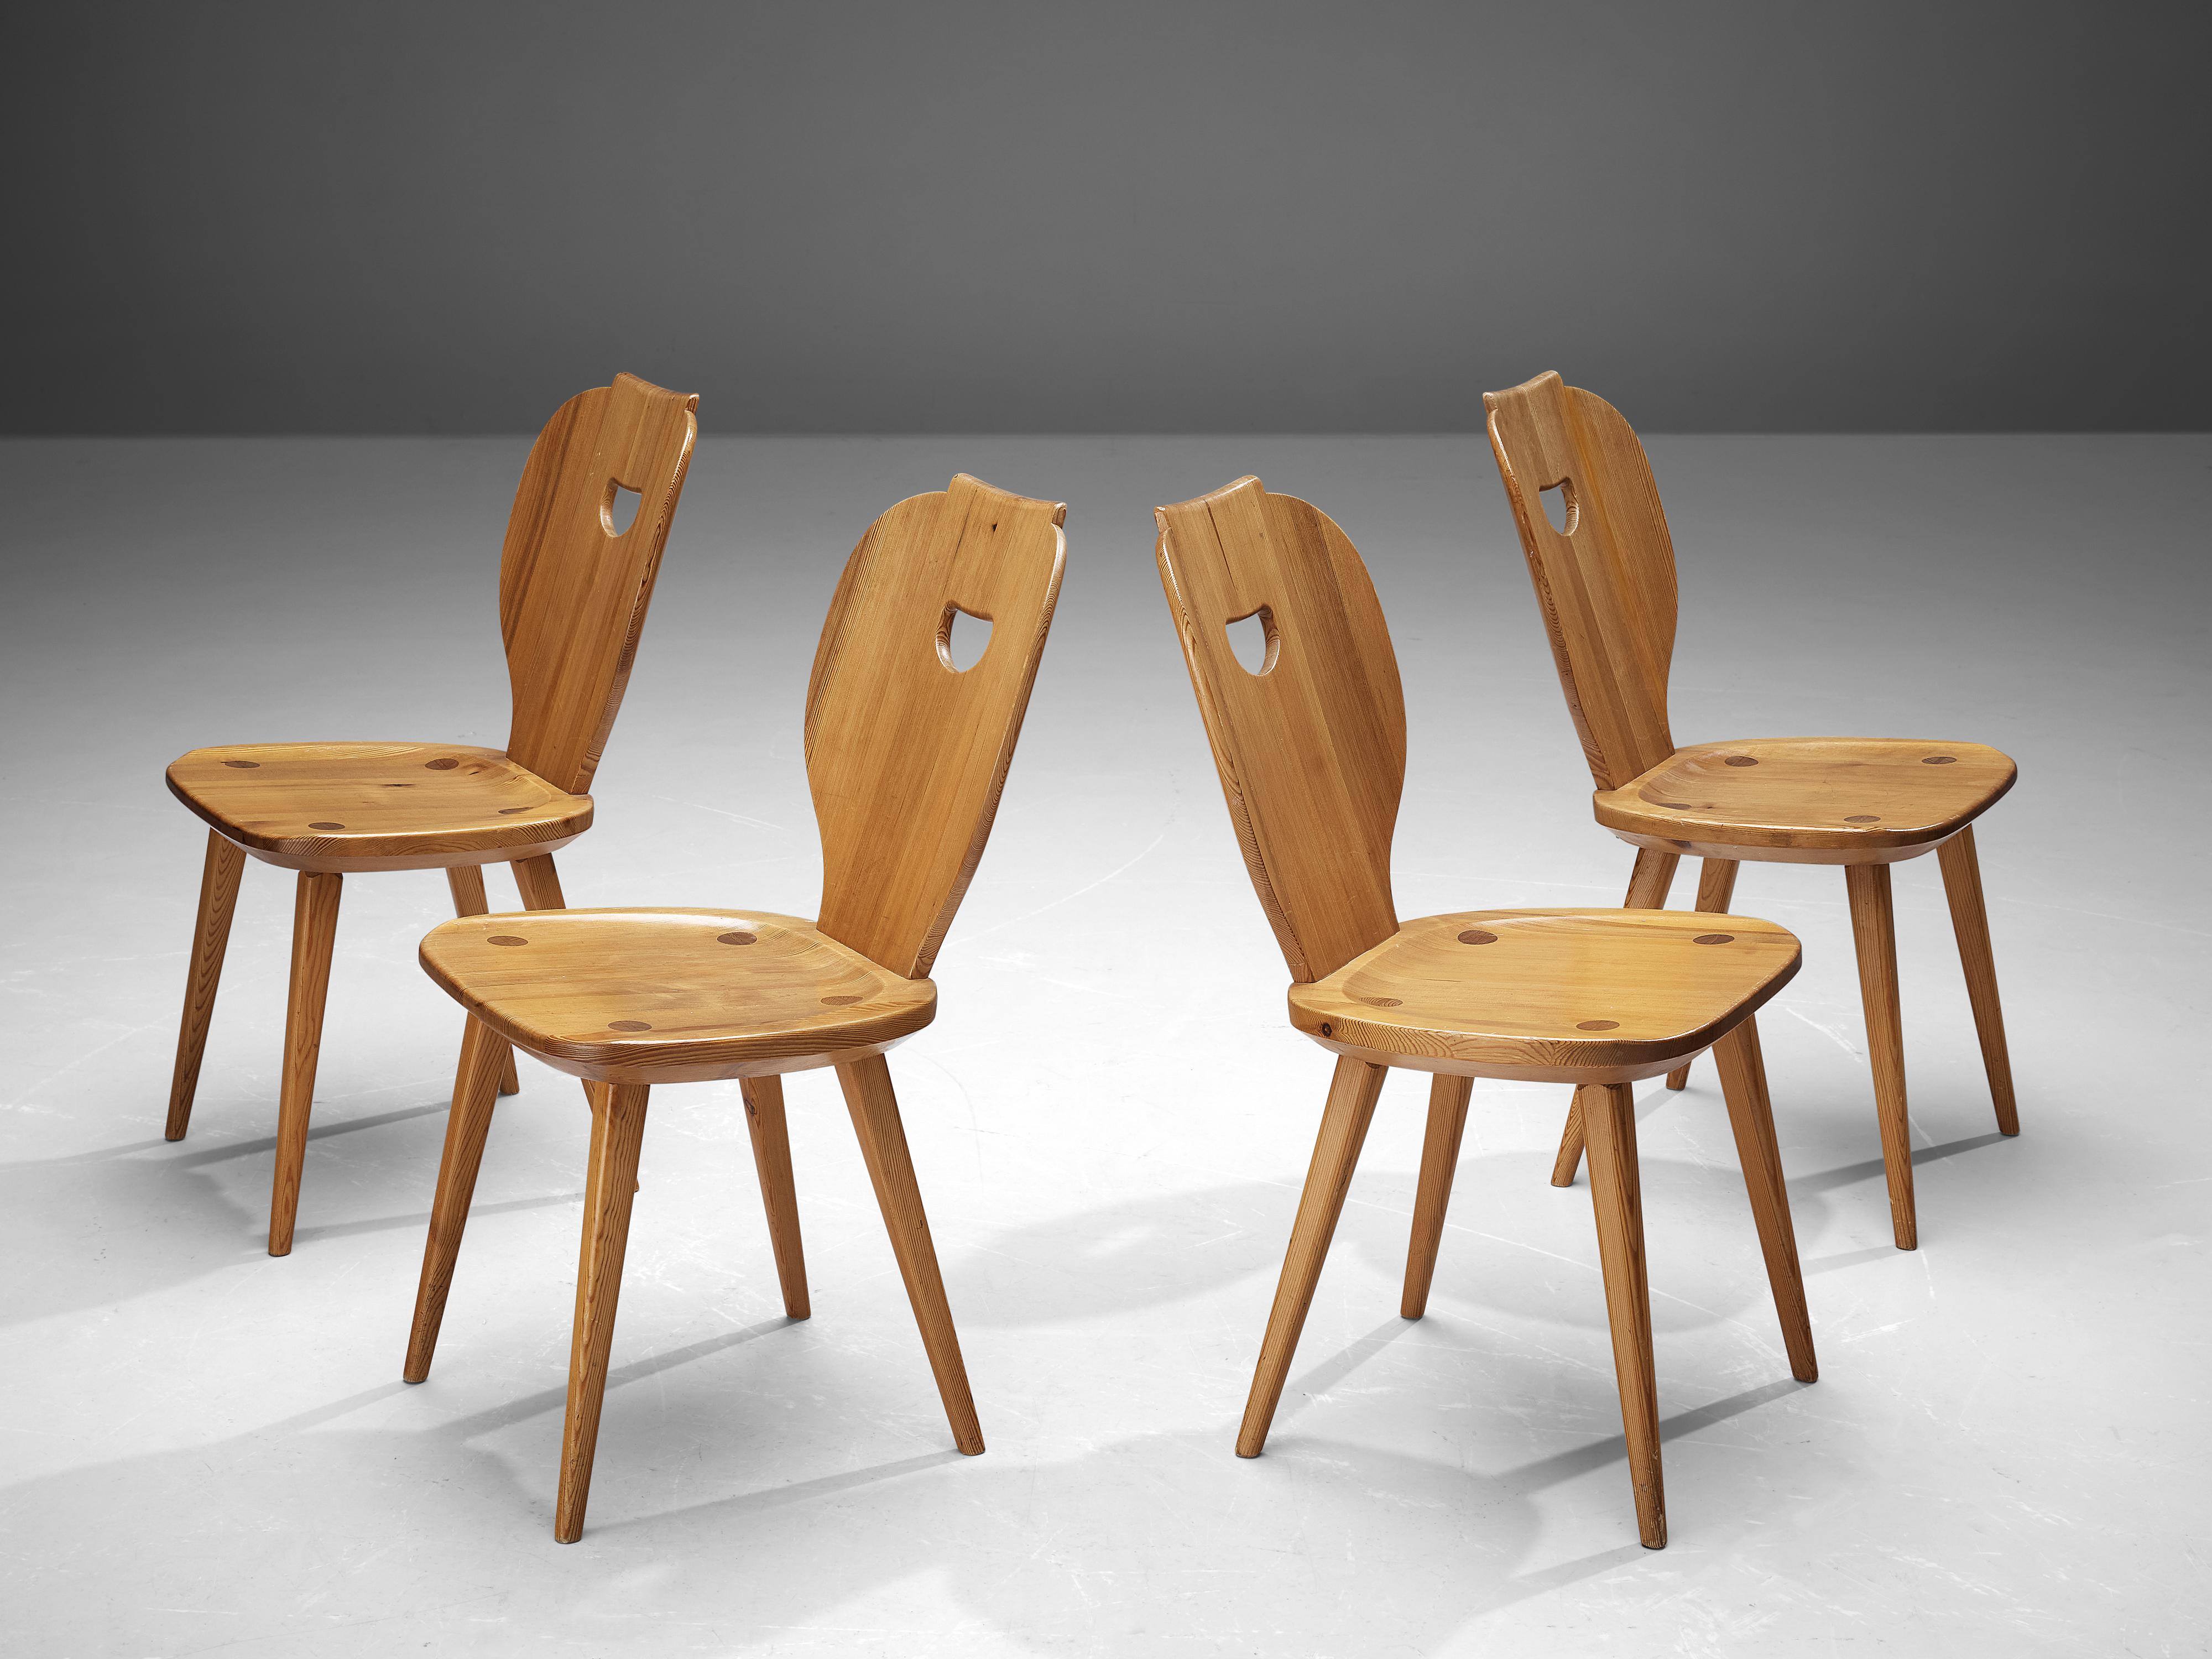 Carl Malmsten for Svensk Fur, dining chairs model 'Sörgården', pine, Sweden, 1950s

This set of four dining chairs designed by Malmsten and manufactured by Svensk Fur combines comfort with functional and visual aspects. Not only provides Malmsten's